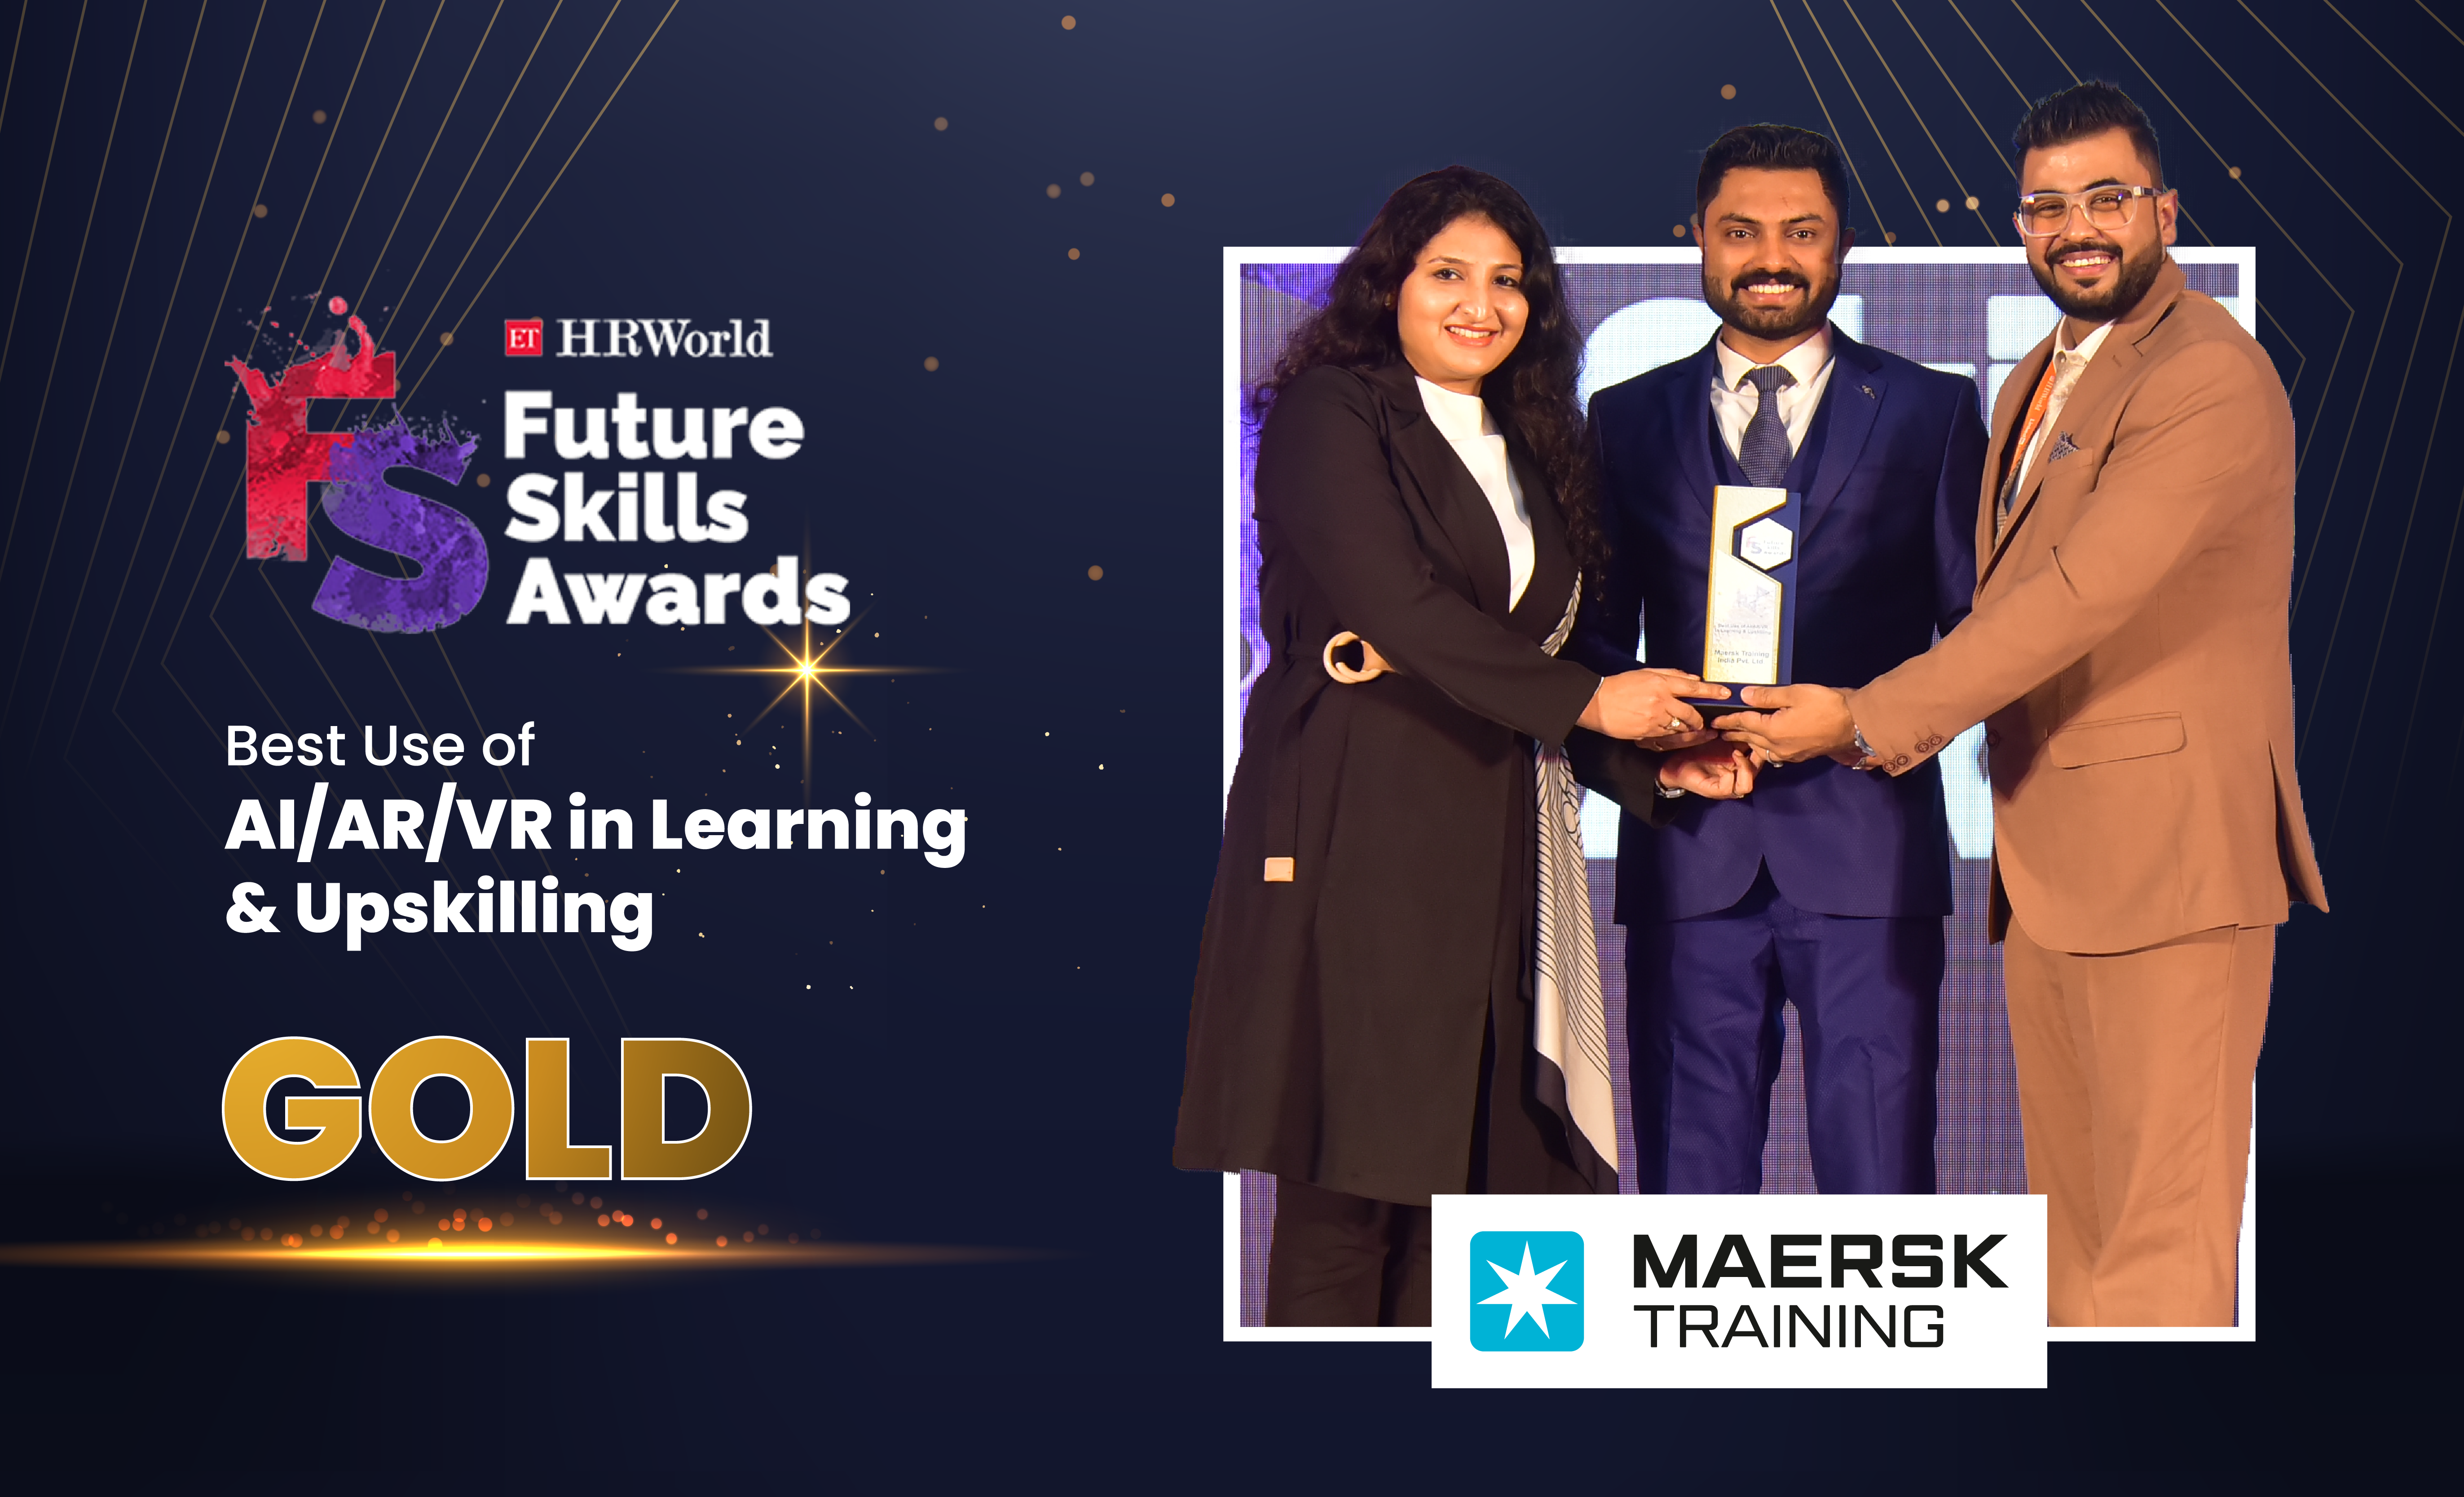 Maersk Training Receives GOLD Honour at Economic Times Future Skills Awards for Best Use of AI/AR/VR in Learning and Upskilling